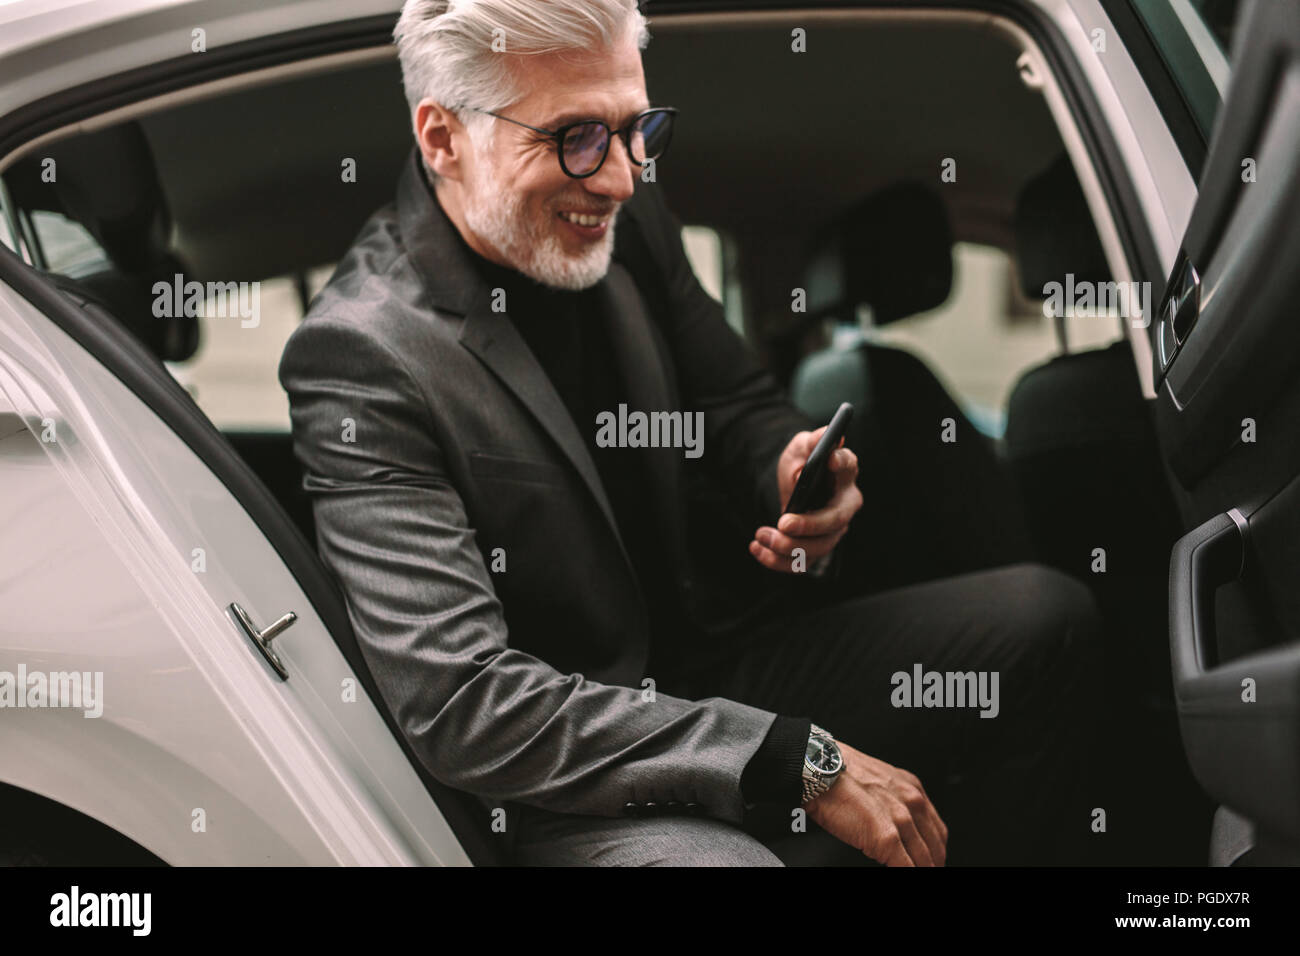 Smiling mature businessman sitting in the backseat of a taxi and looking at his phone. Senior male commuter taking a taxi ride in city. Stock Photo